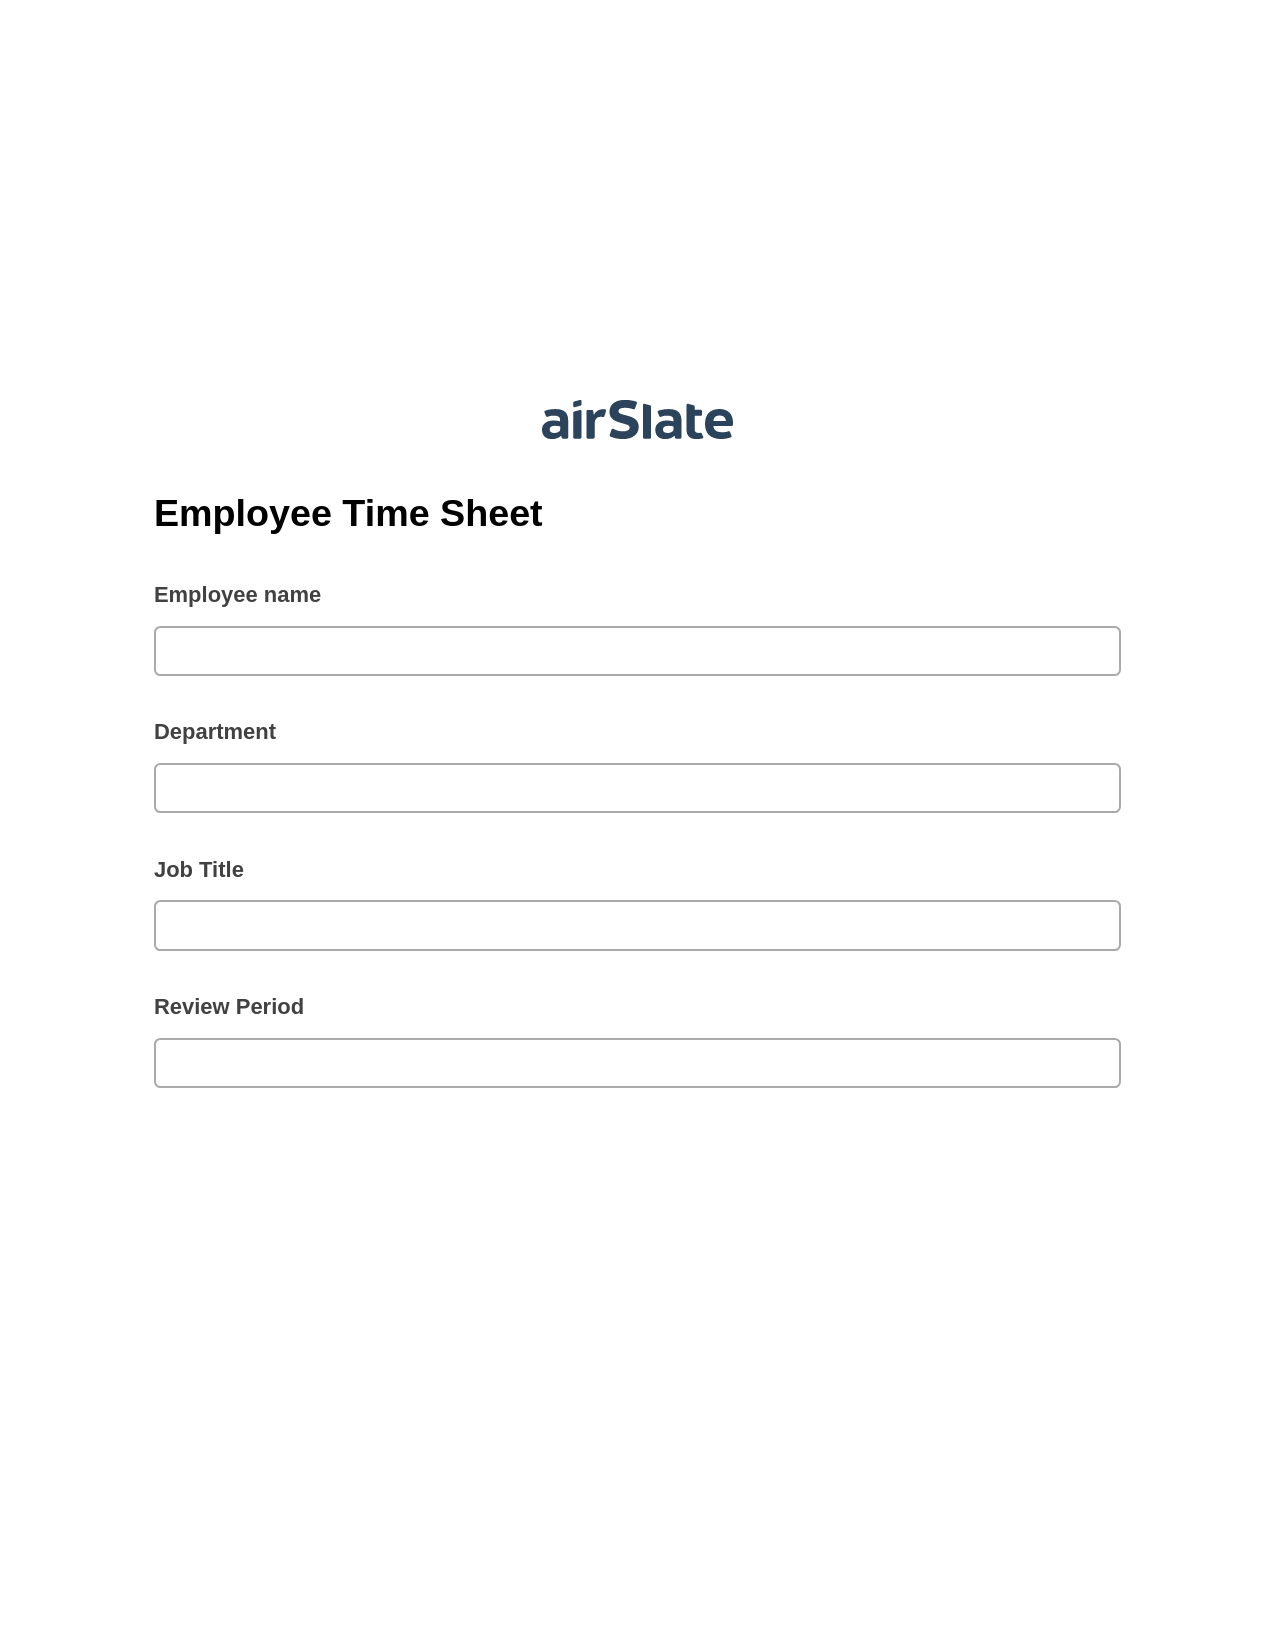 Multirole Employee Time Sheet Pre-fill from another Slate Bot, Create slate from another Flow Bot, Archive to SharePoint Folder Bot